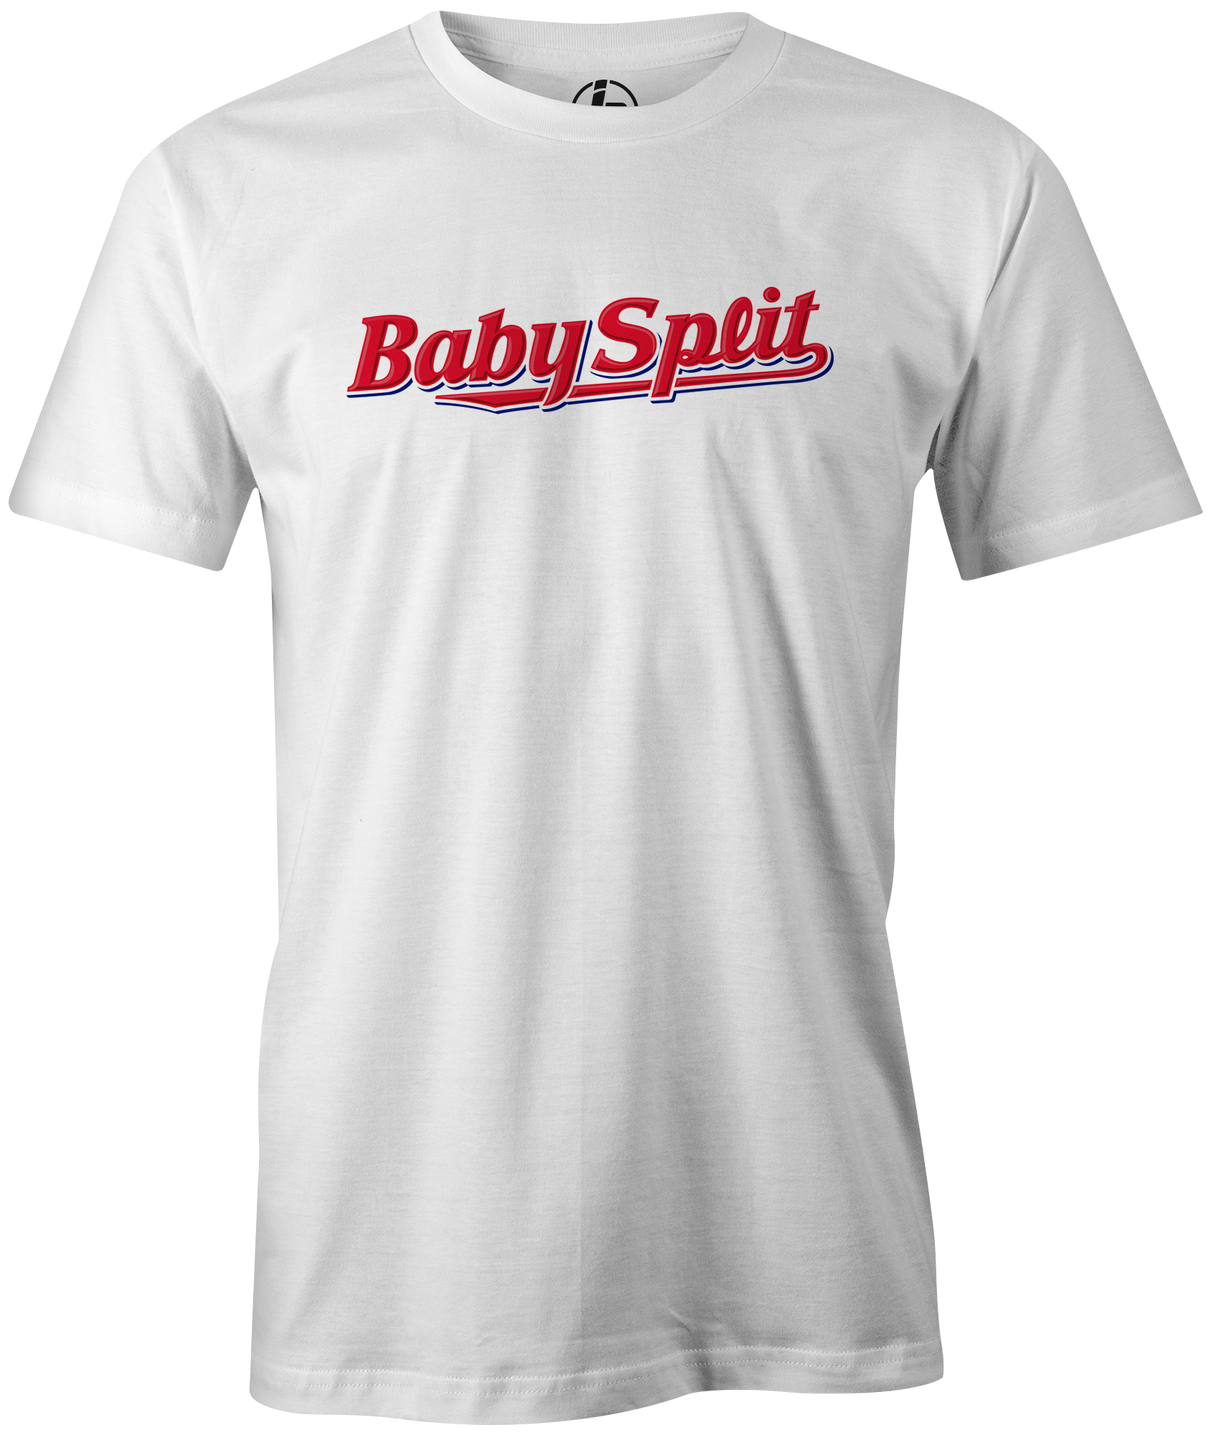 baby split ruth candy bar bowling novelty funny league team shirt tee tshirt gift for bowlers blue silver red